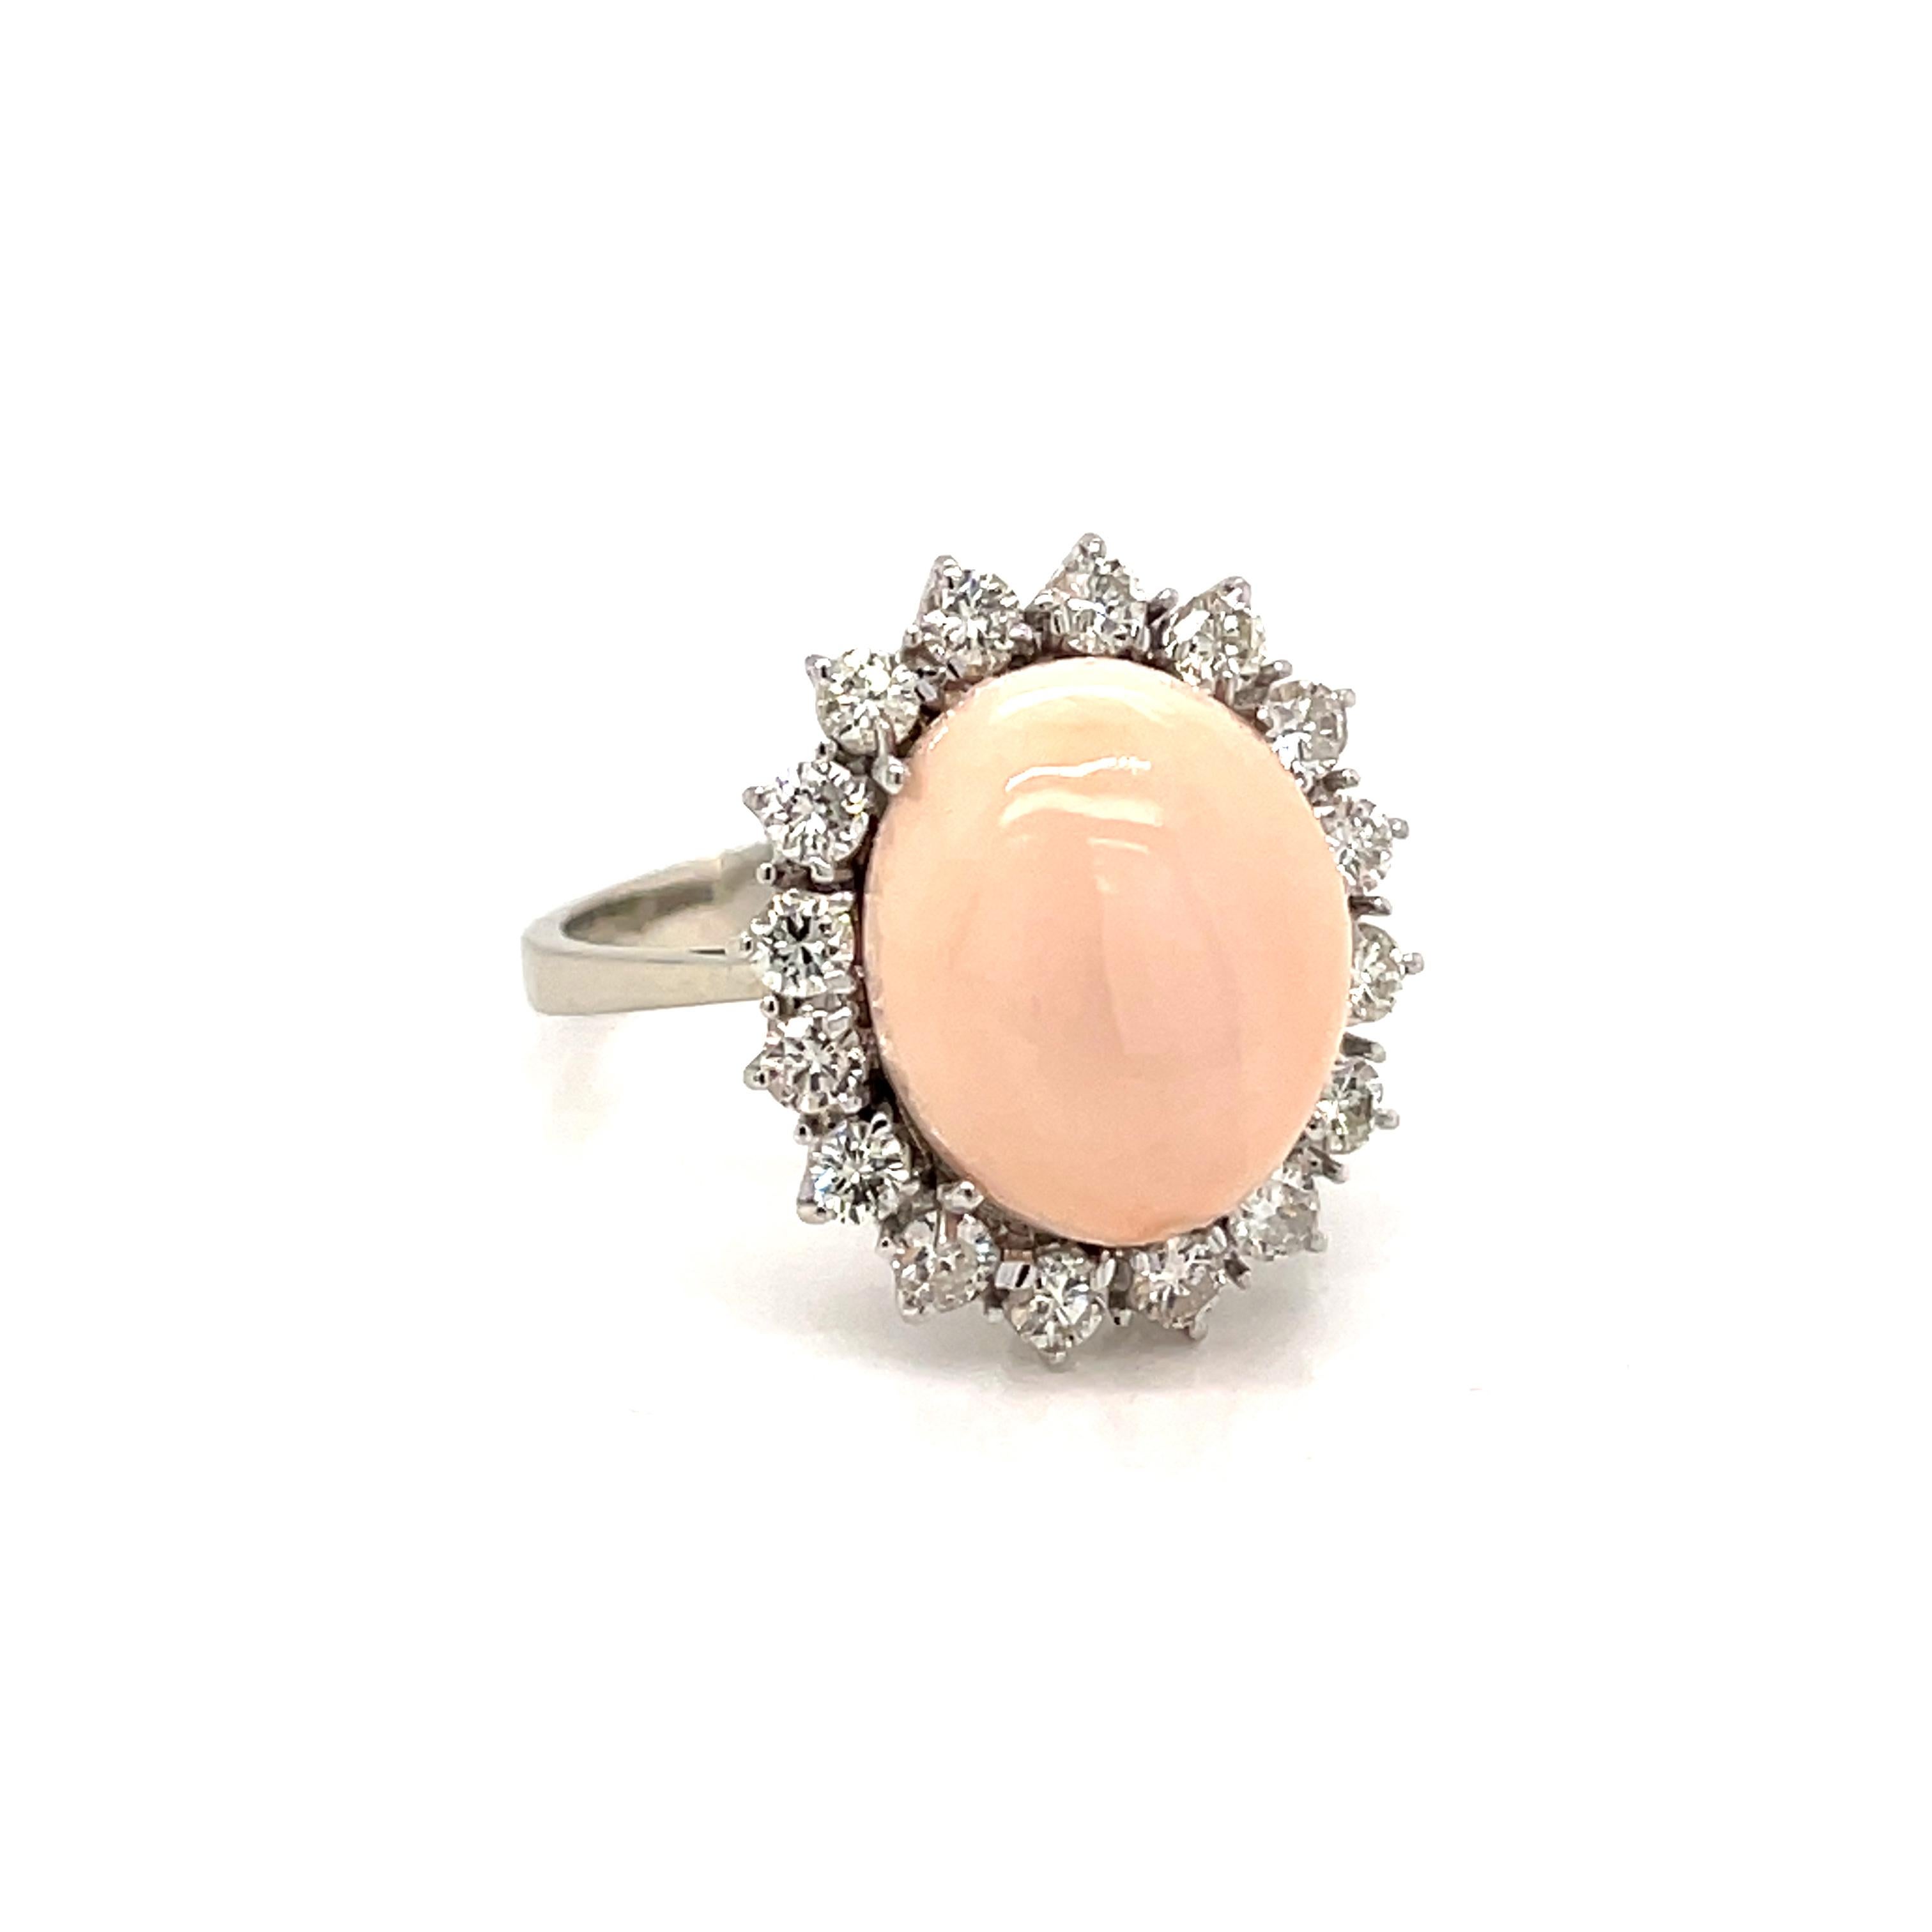 Beautiful Vintage Cocktail Ring mounted in 18k white gold set with a natural, of great quality, Peau D'Ange/Angel skin Coral surrounded by 1 carat of Round brilliant cut diamonds graded G color Vvs clarity 
Made in Italy, circa 1980

CONDITION: